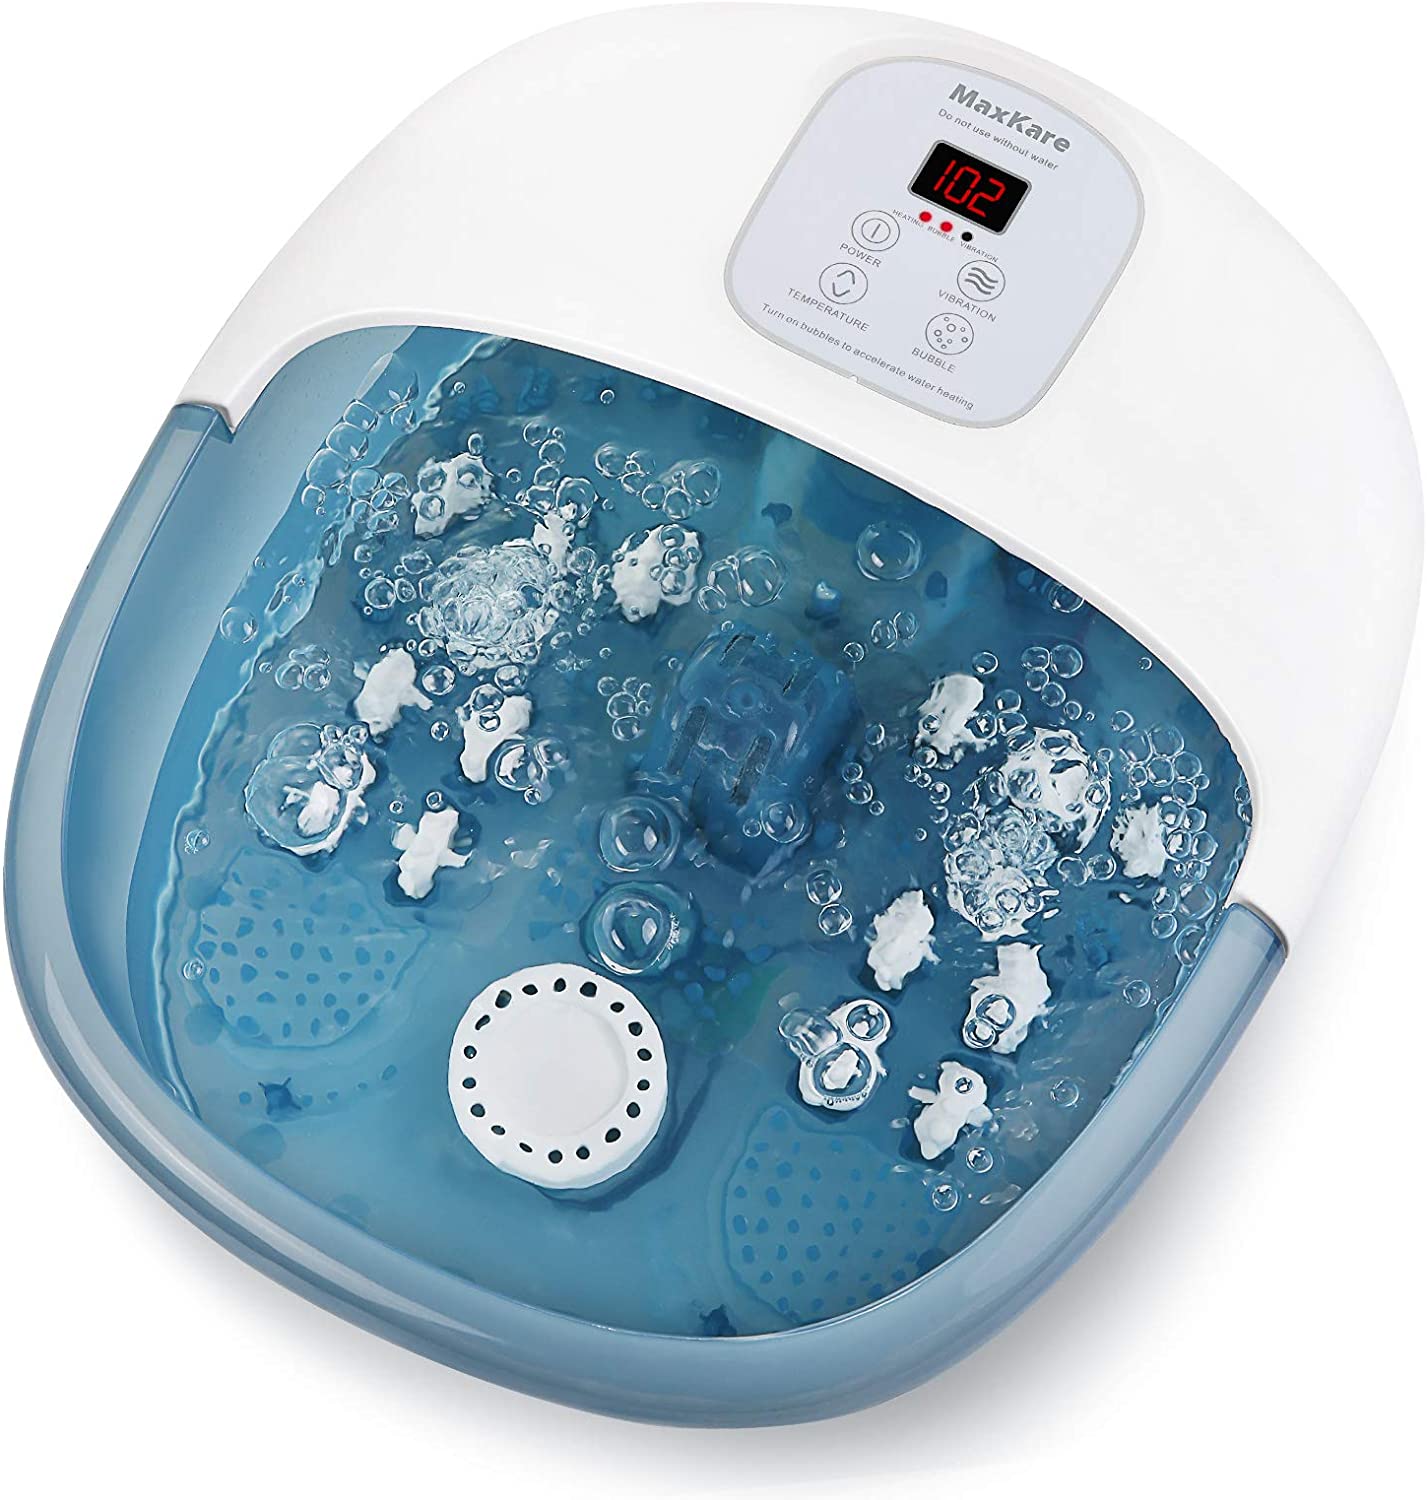 http://www.maxkare.net/cdn/shop/products/foot-bath-massager-with-heat-bubbles-vibration-and-14-massage-rollers-foot-spa-basin-pedicure-soaking-feet-with-adjustable-temperature-and-auto-shut-off-comfort-647164.jpg?v=1626676648